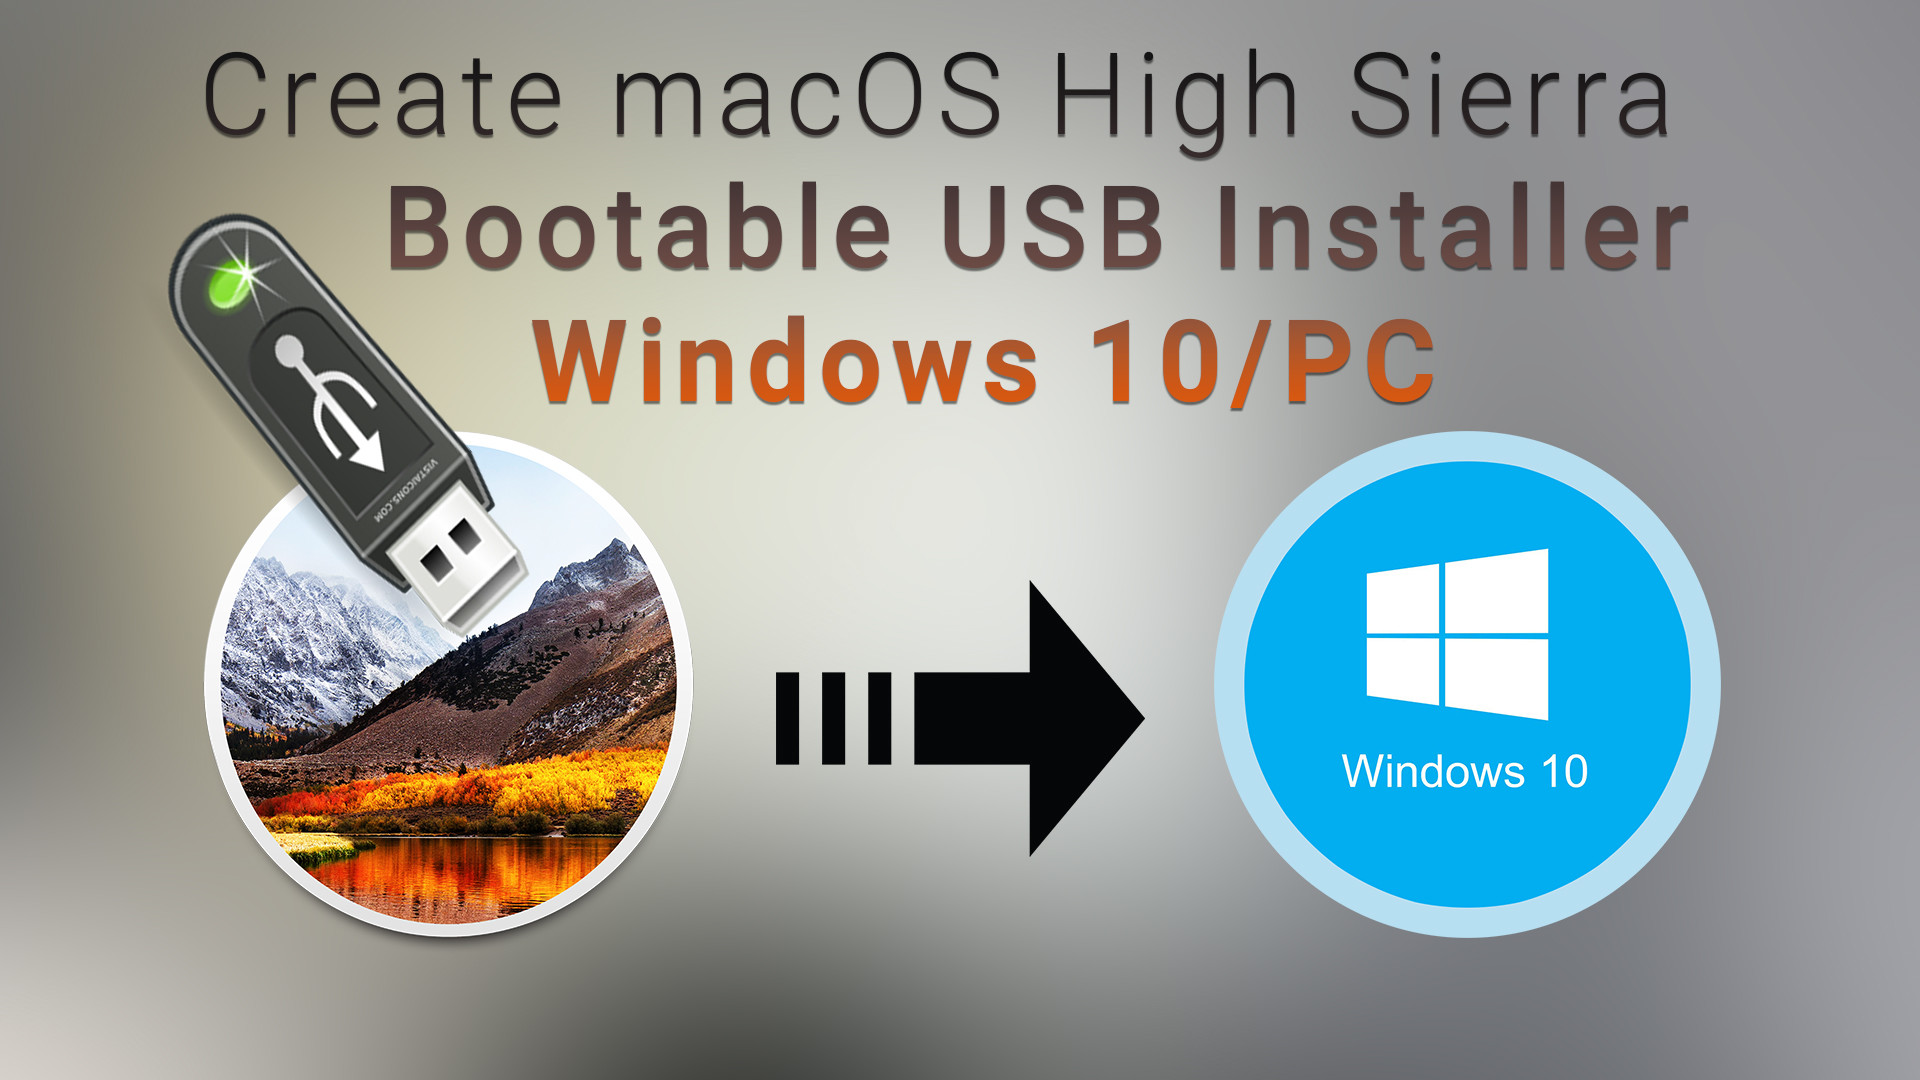 need to create a boot usb for new computer only have mac